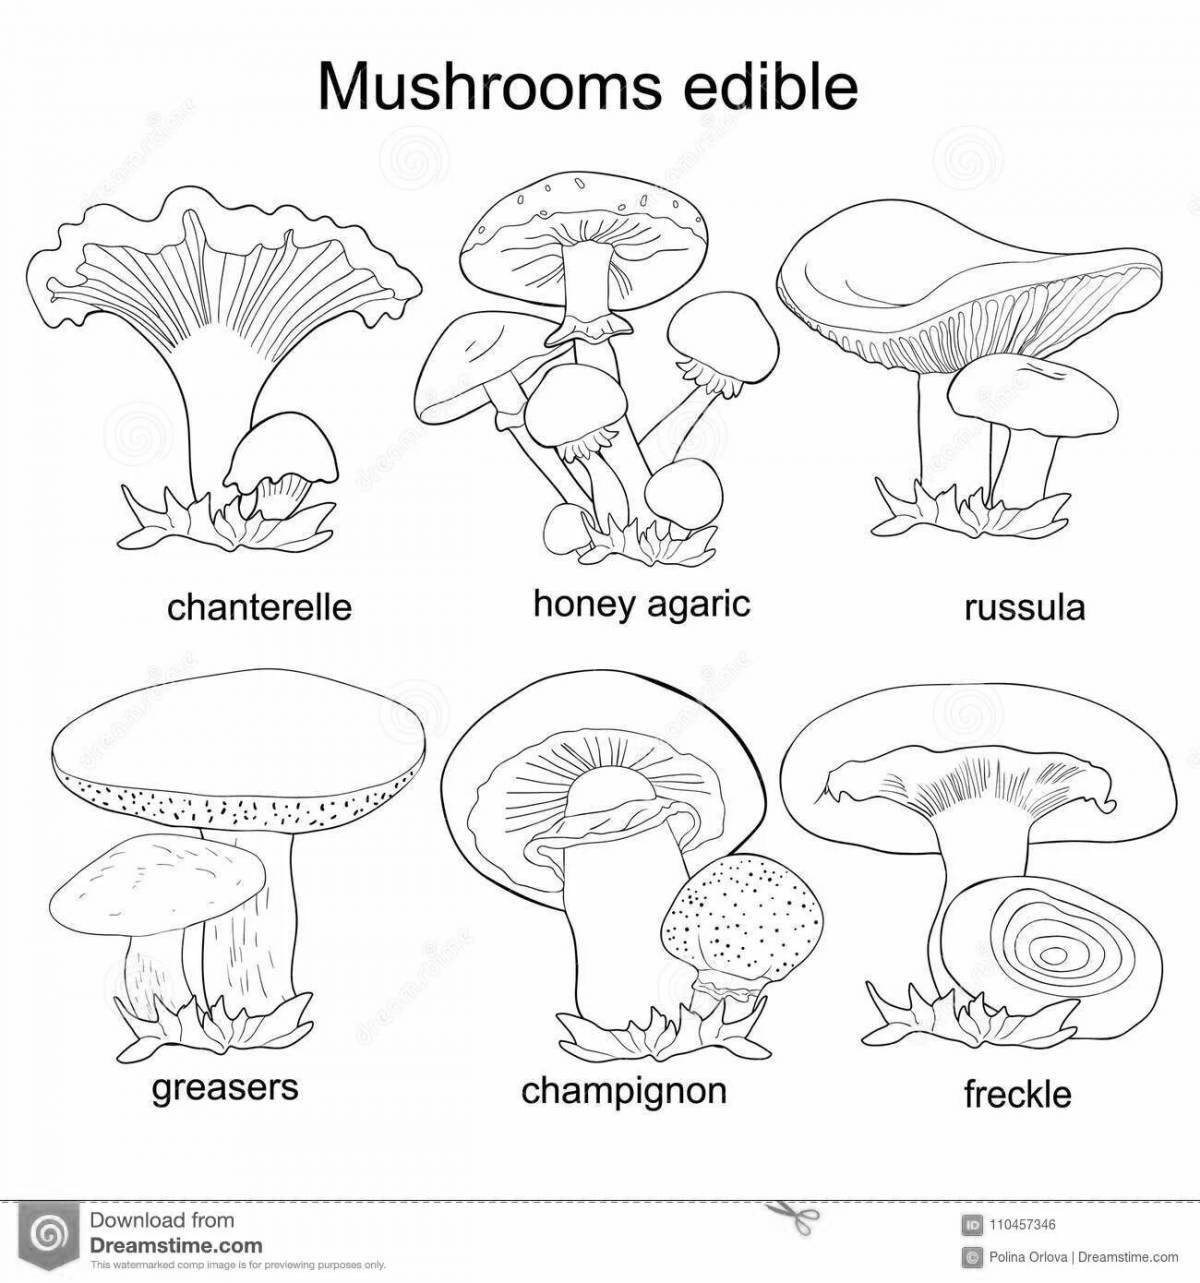 Mushrooms, edible and poisonous #3